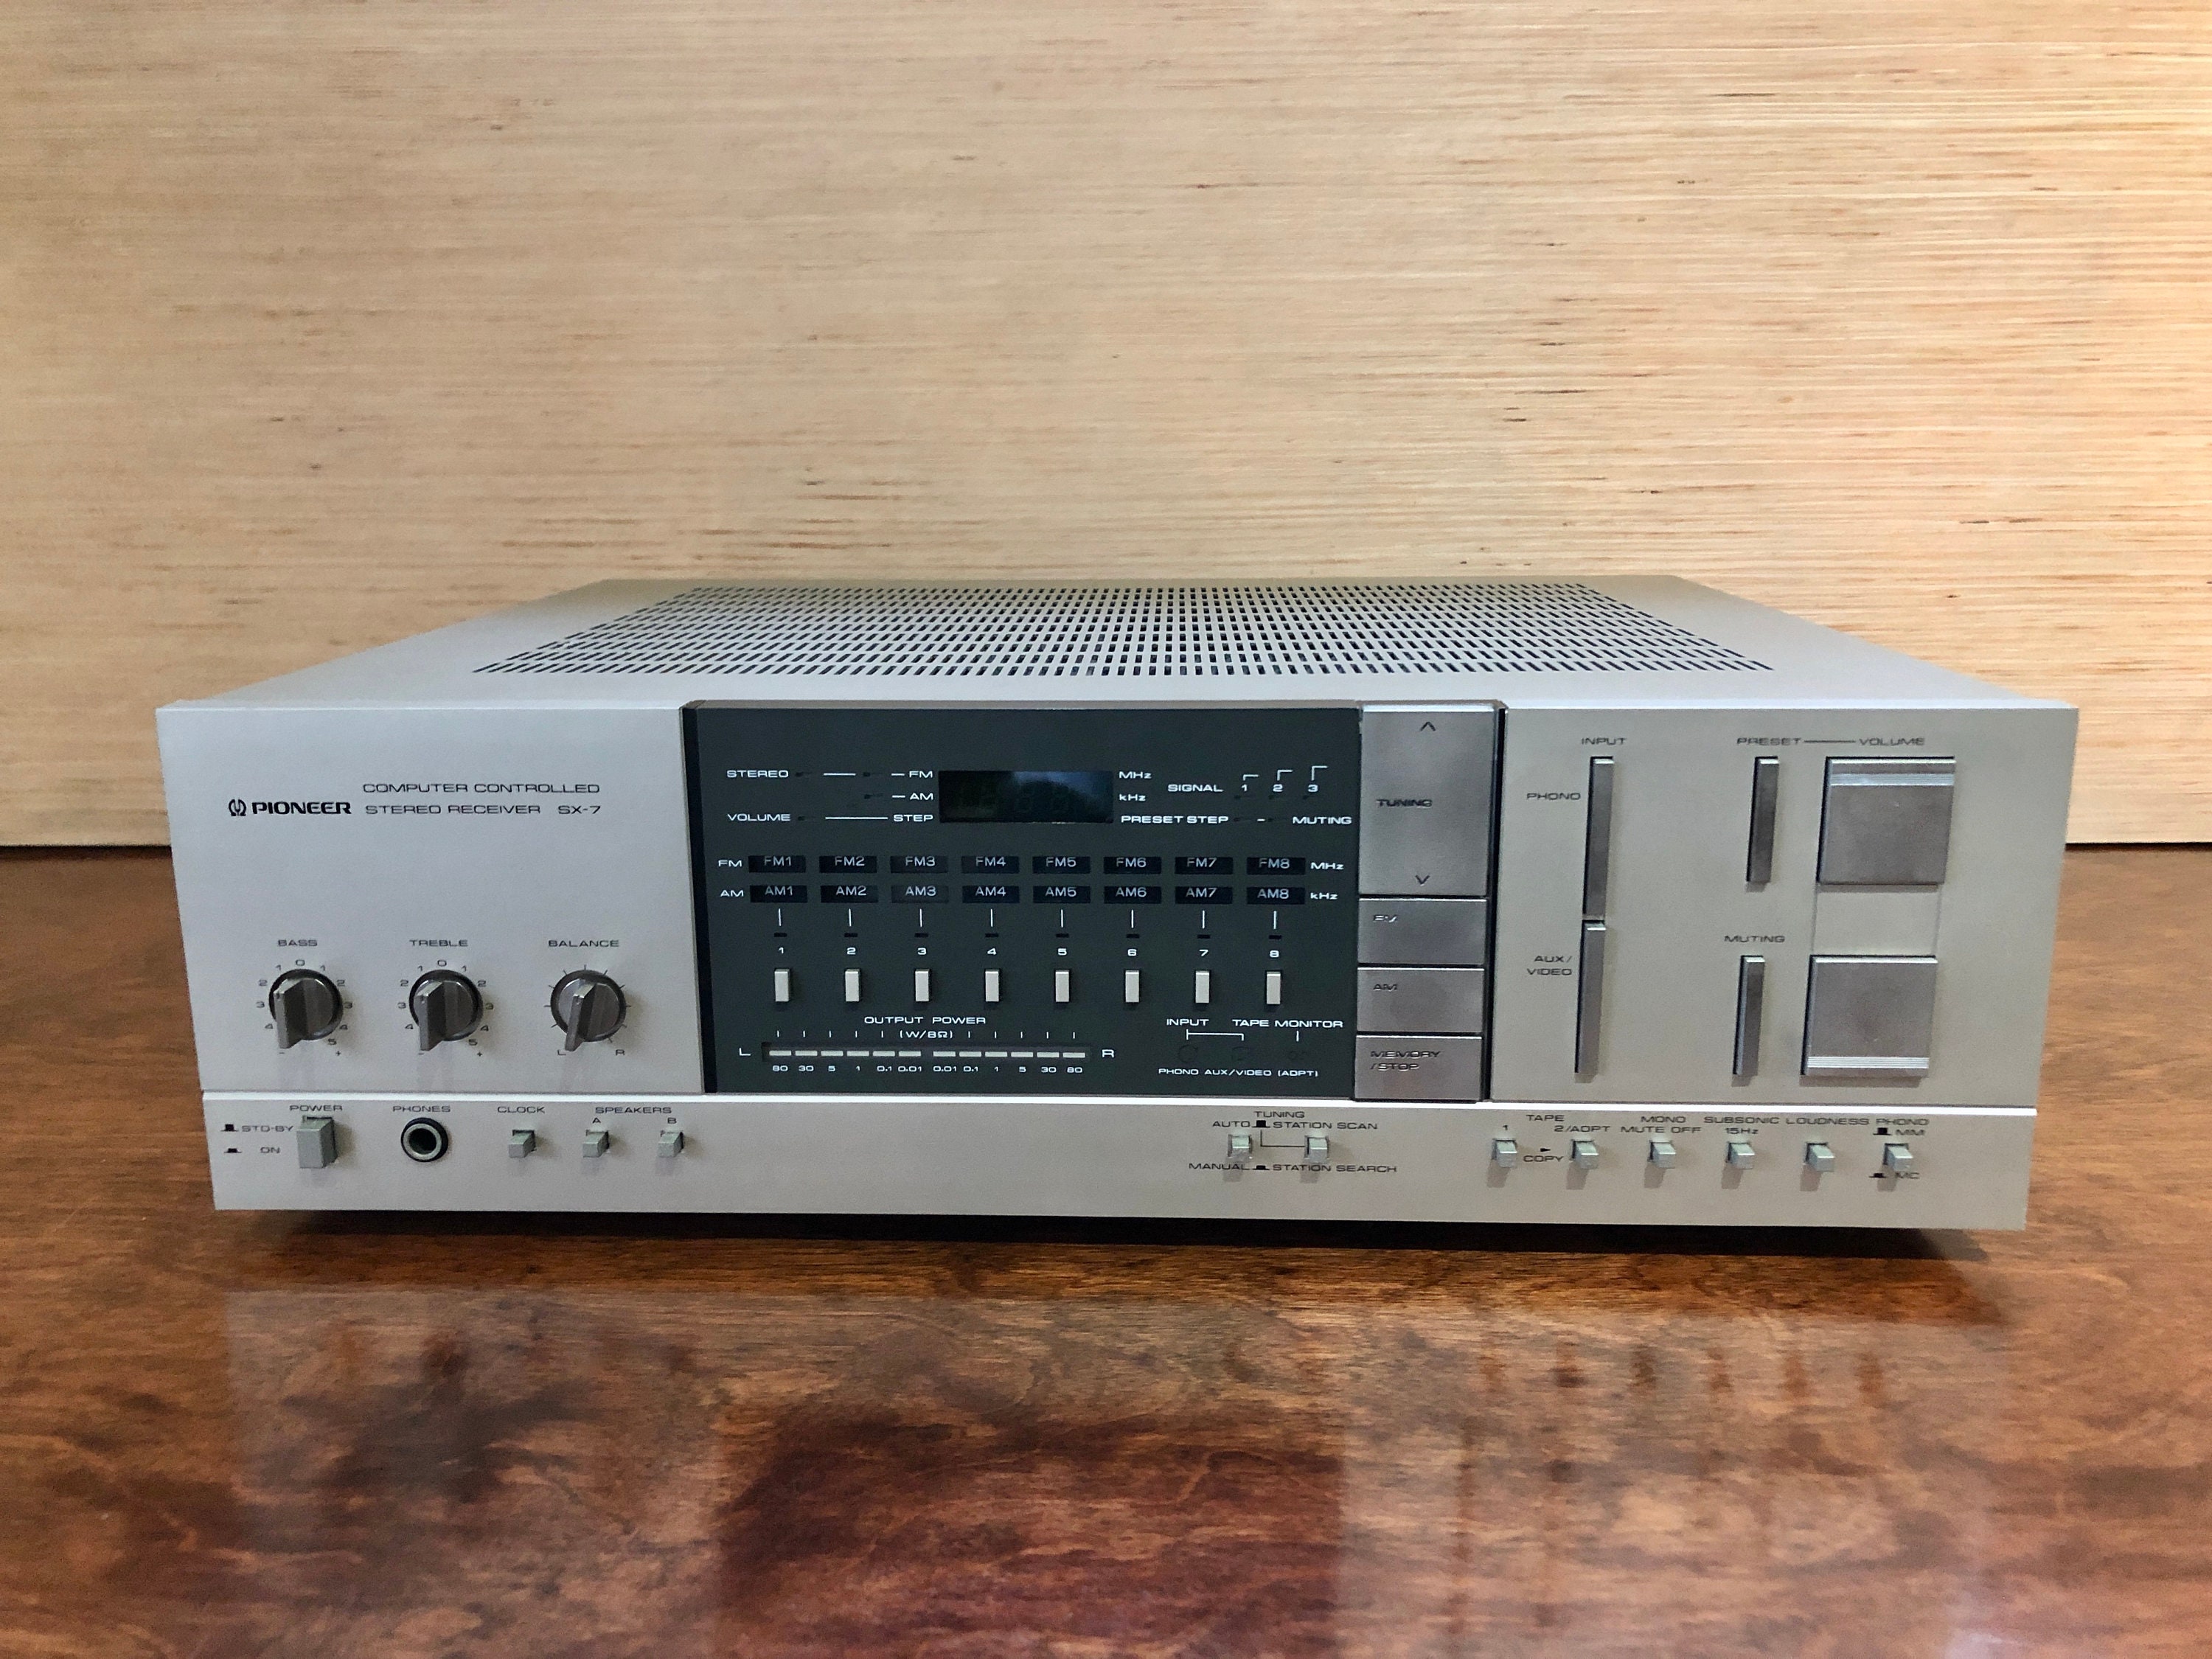 Vintage Pioneer AM FM Computer Controlled Stereo Receiver SX-7 80s